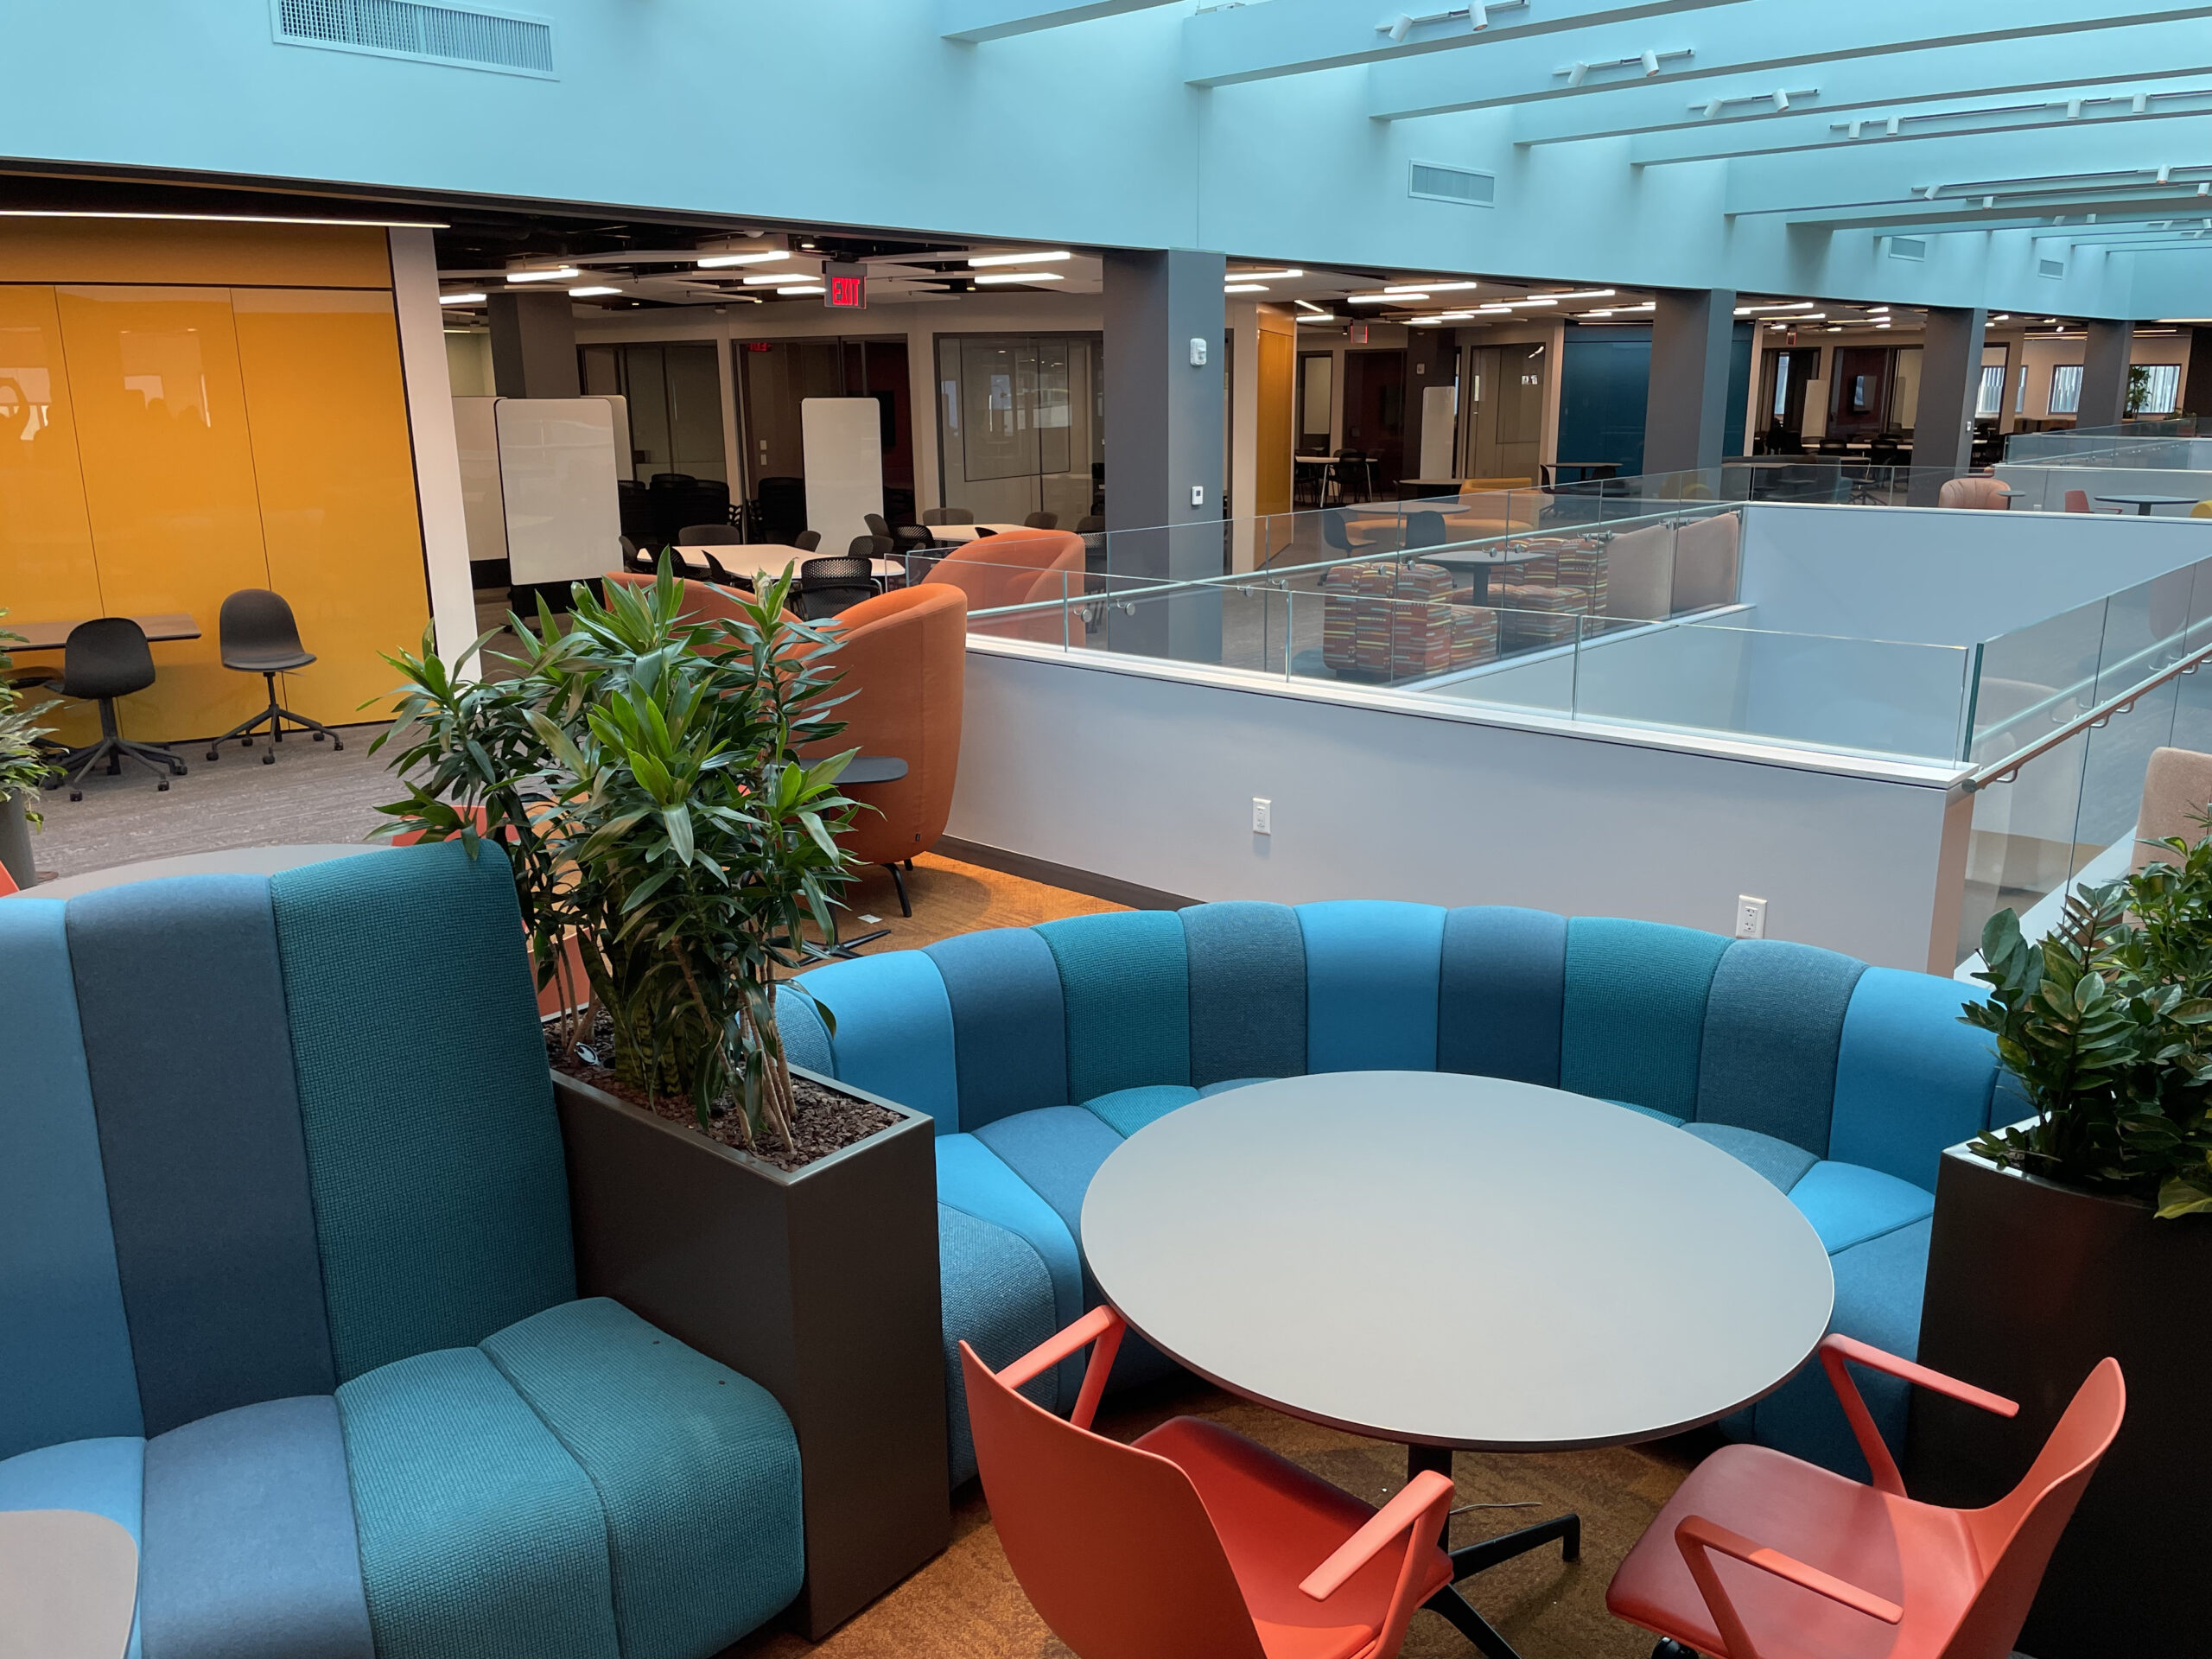 The newly renovated 4th floor of Snell Library